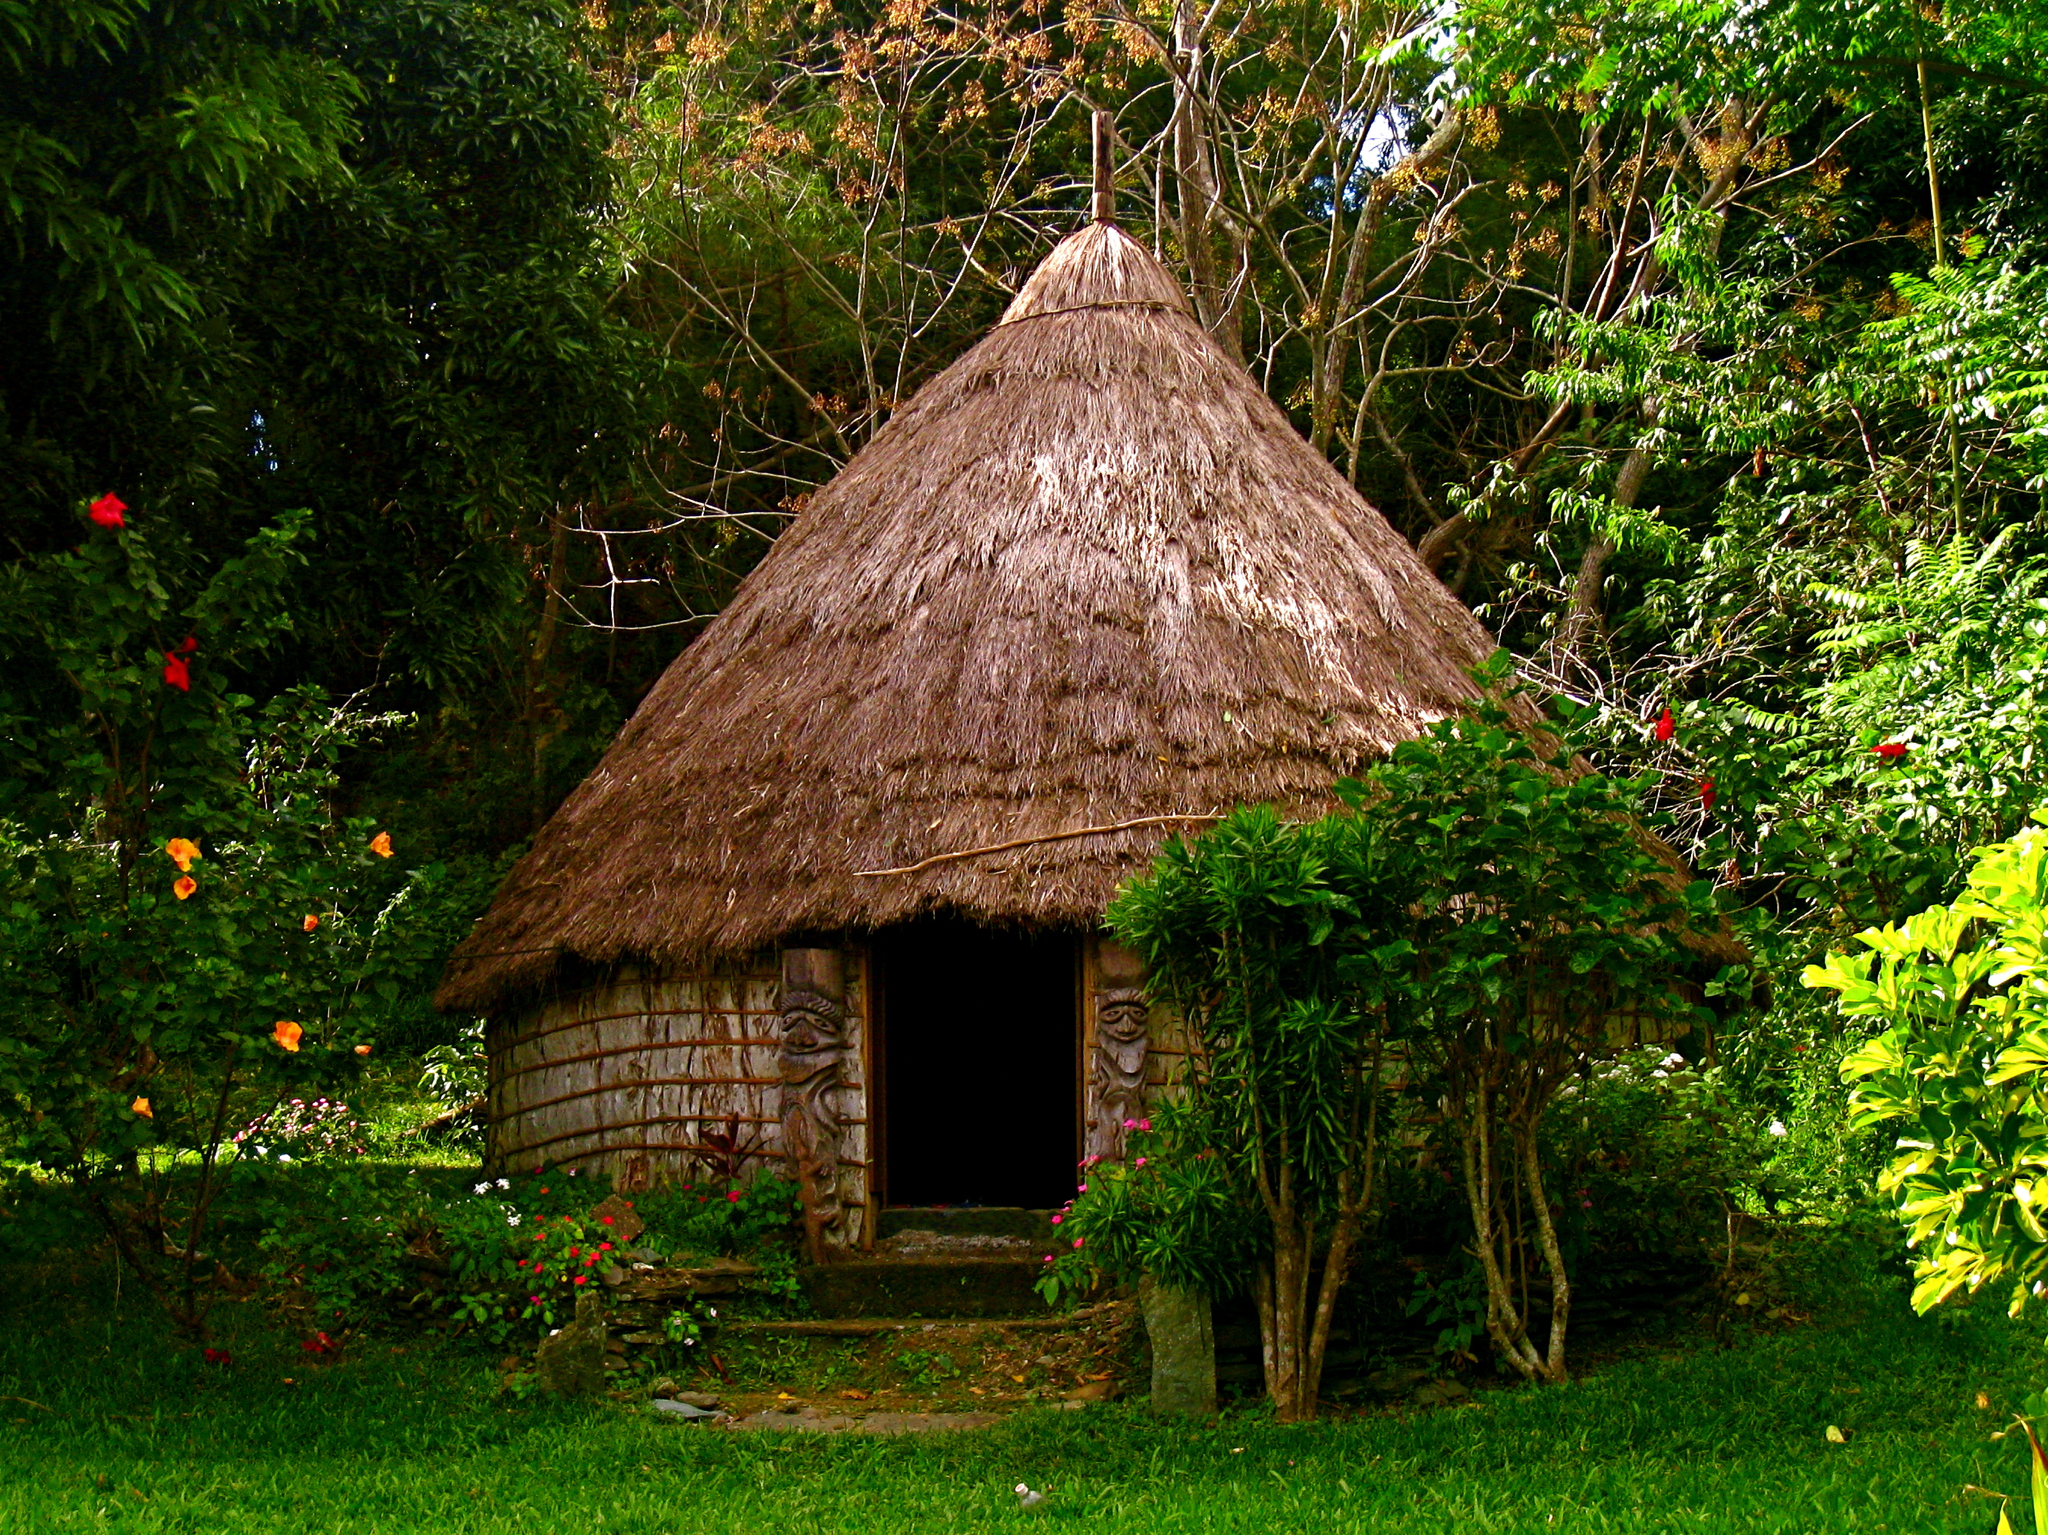 an old thatched hut nestled in a lush green forest